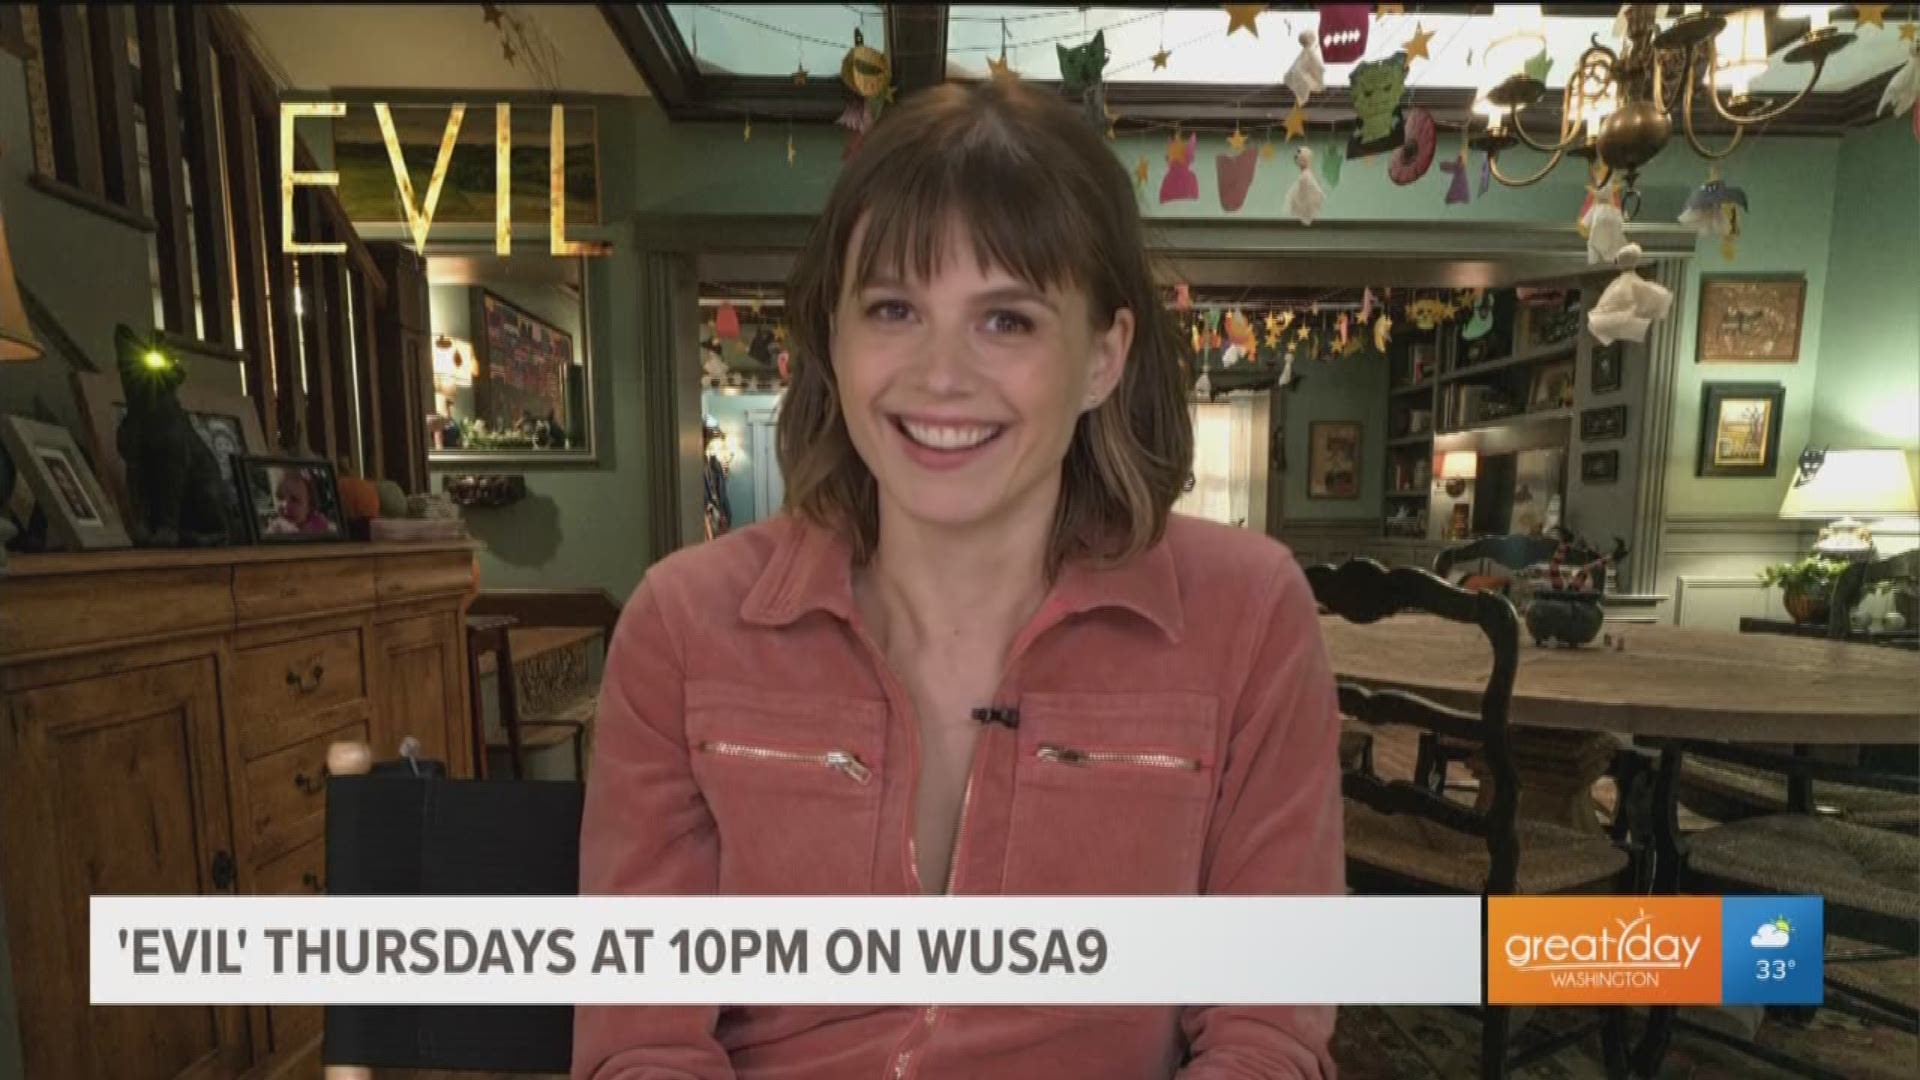 Katja Herbers, star on CBS's new hit show 'Evil' chats about what viewers can expect for the rest of this season. Catch 'Evil' Thursdays at 10 p.m. on WUSA9.